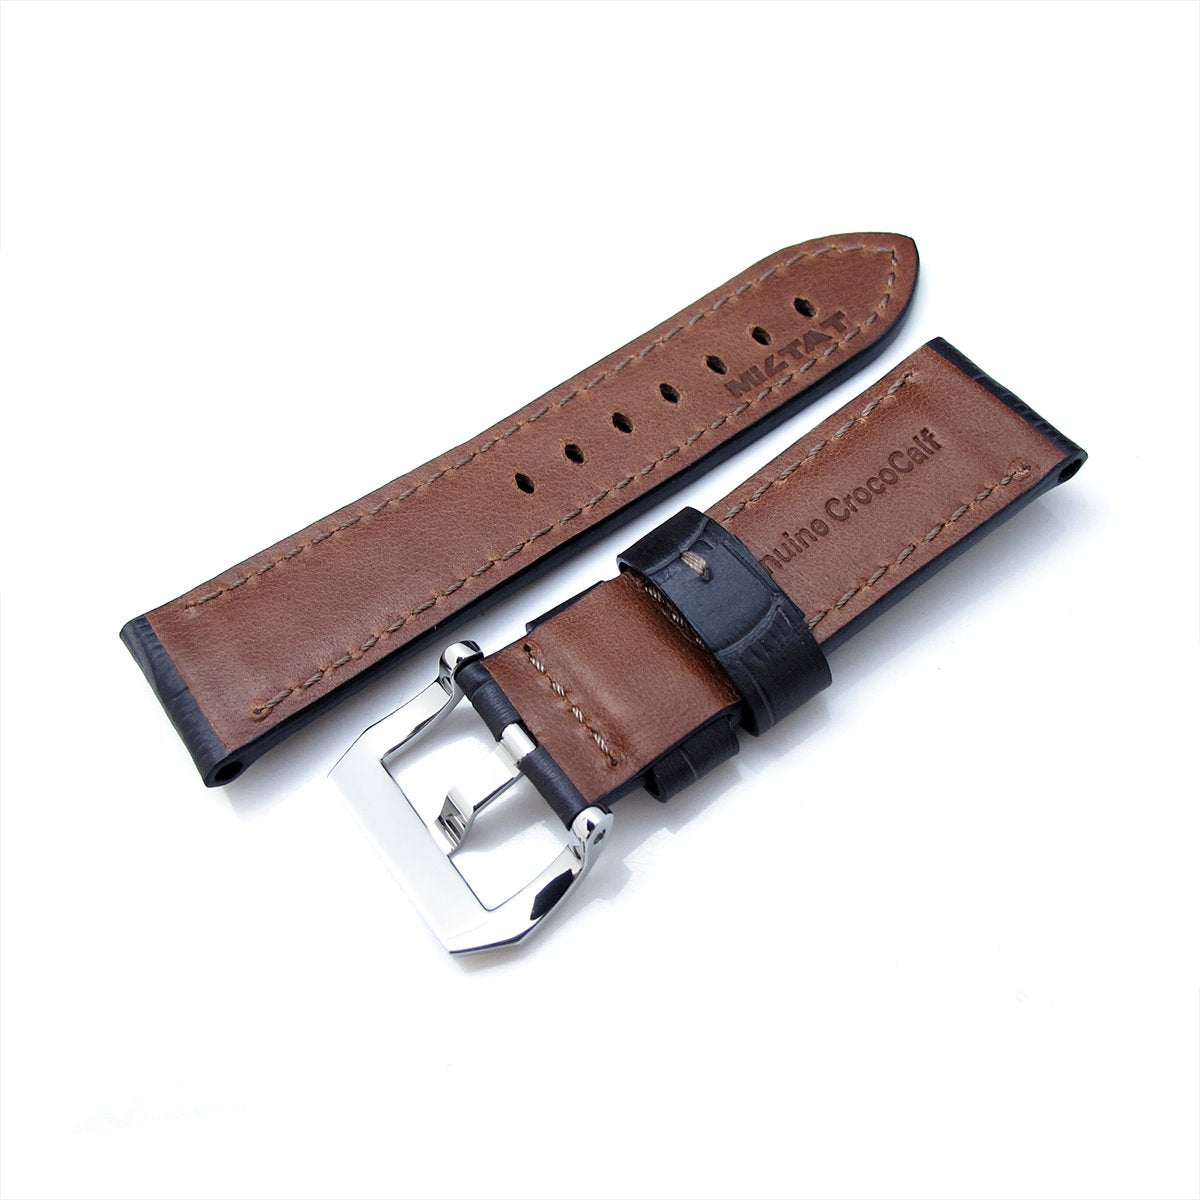 24mm CrocoCalf (Croco Grain) Matte Grey Watch Band Polished Screw-in Buckle Strapcode Watch Bands